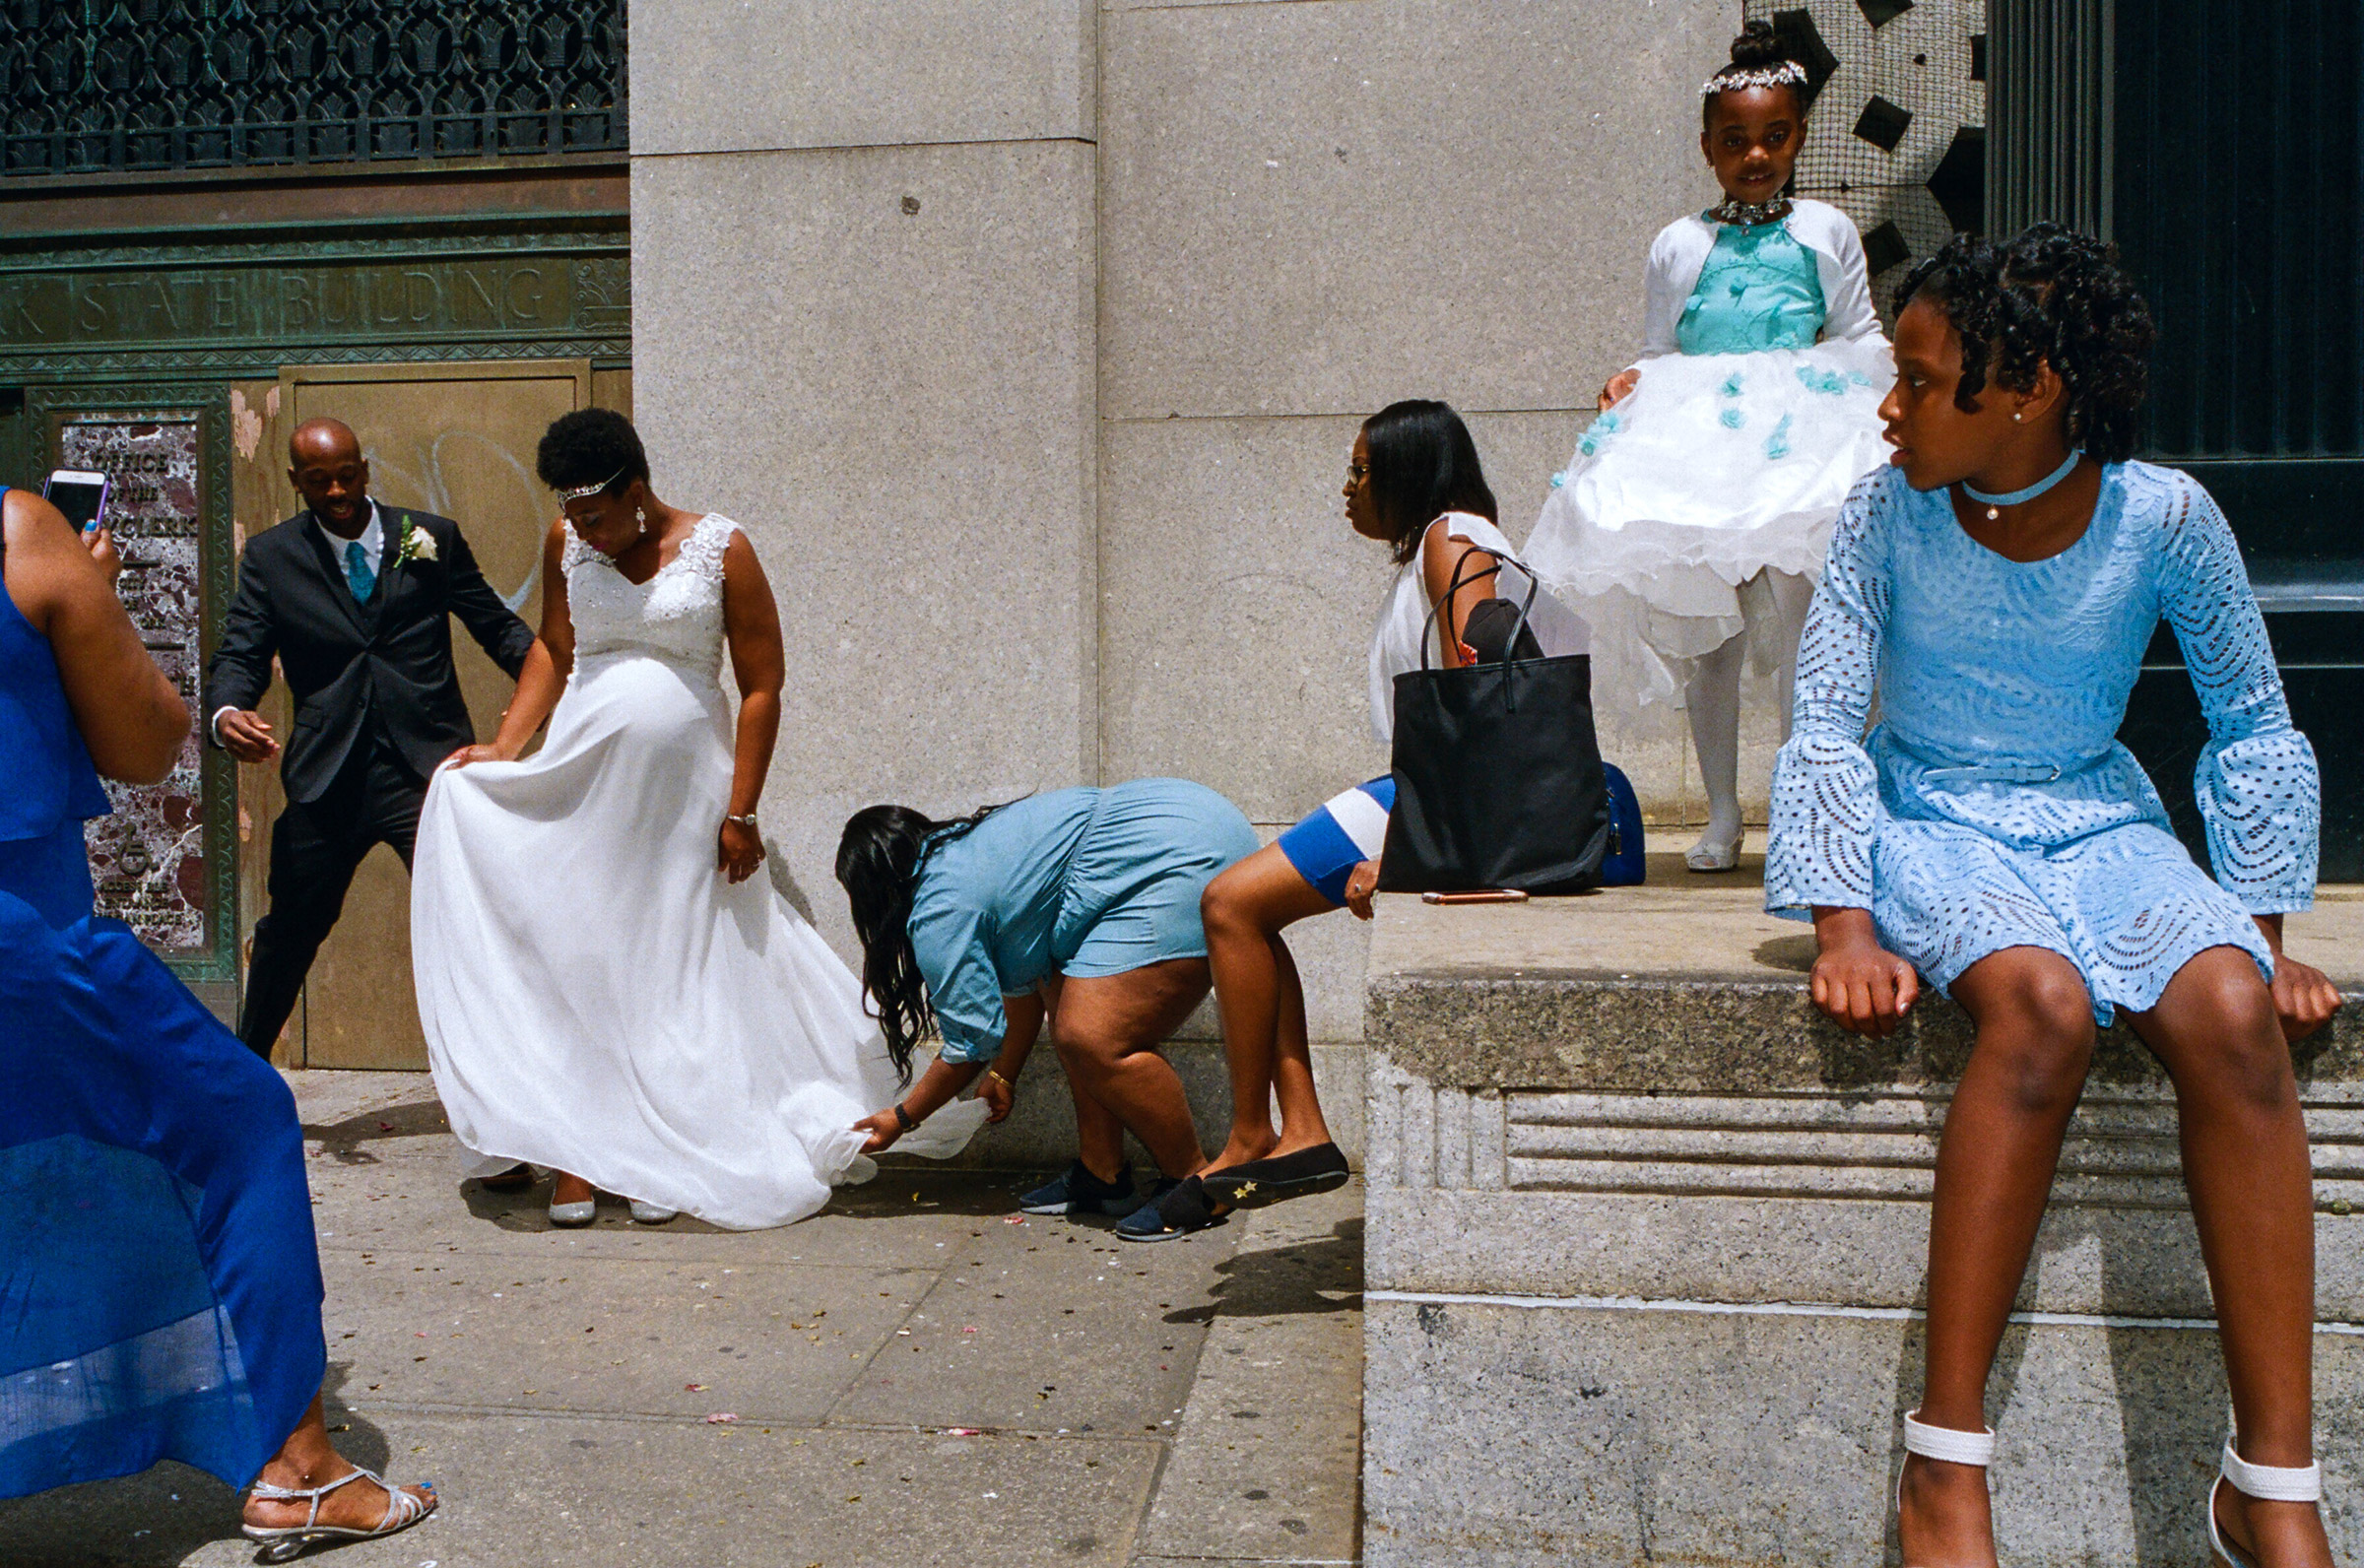 A wedding party outside the City Clerk's office on Worth Street, May 13, 2017. (Daniel Arnold)